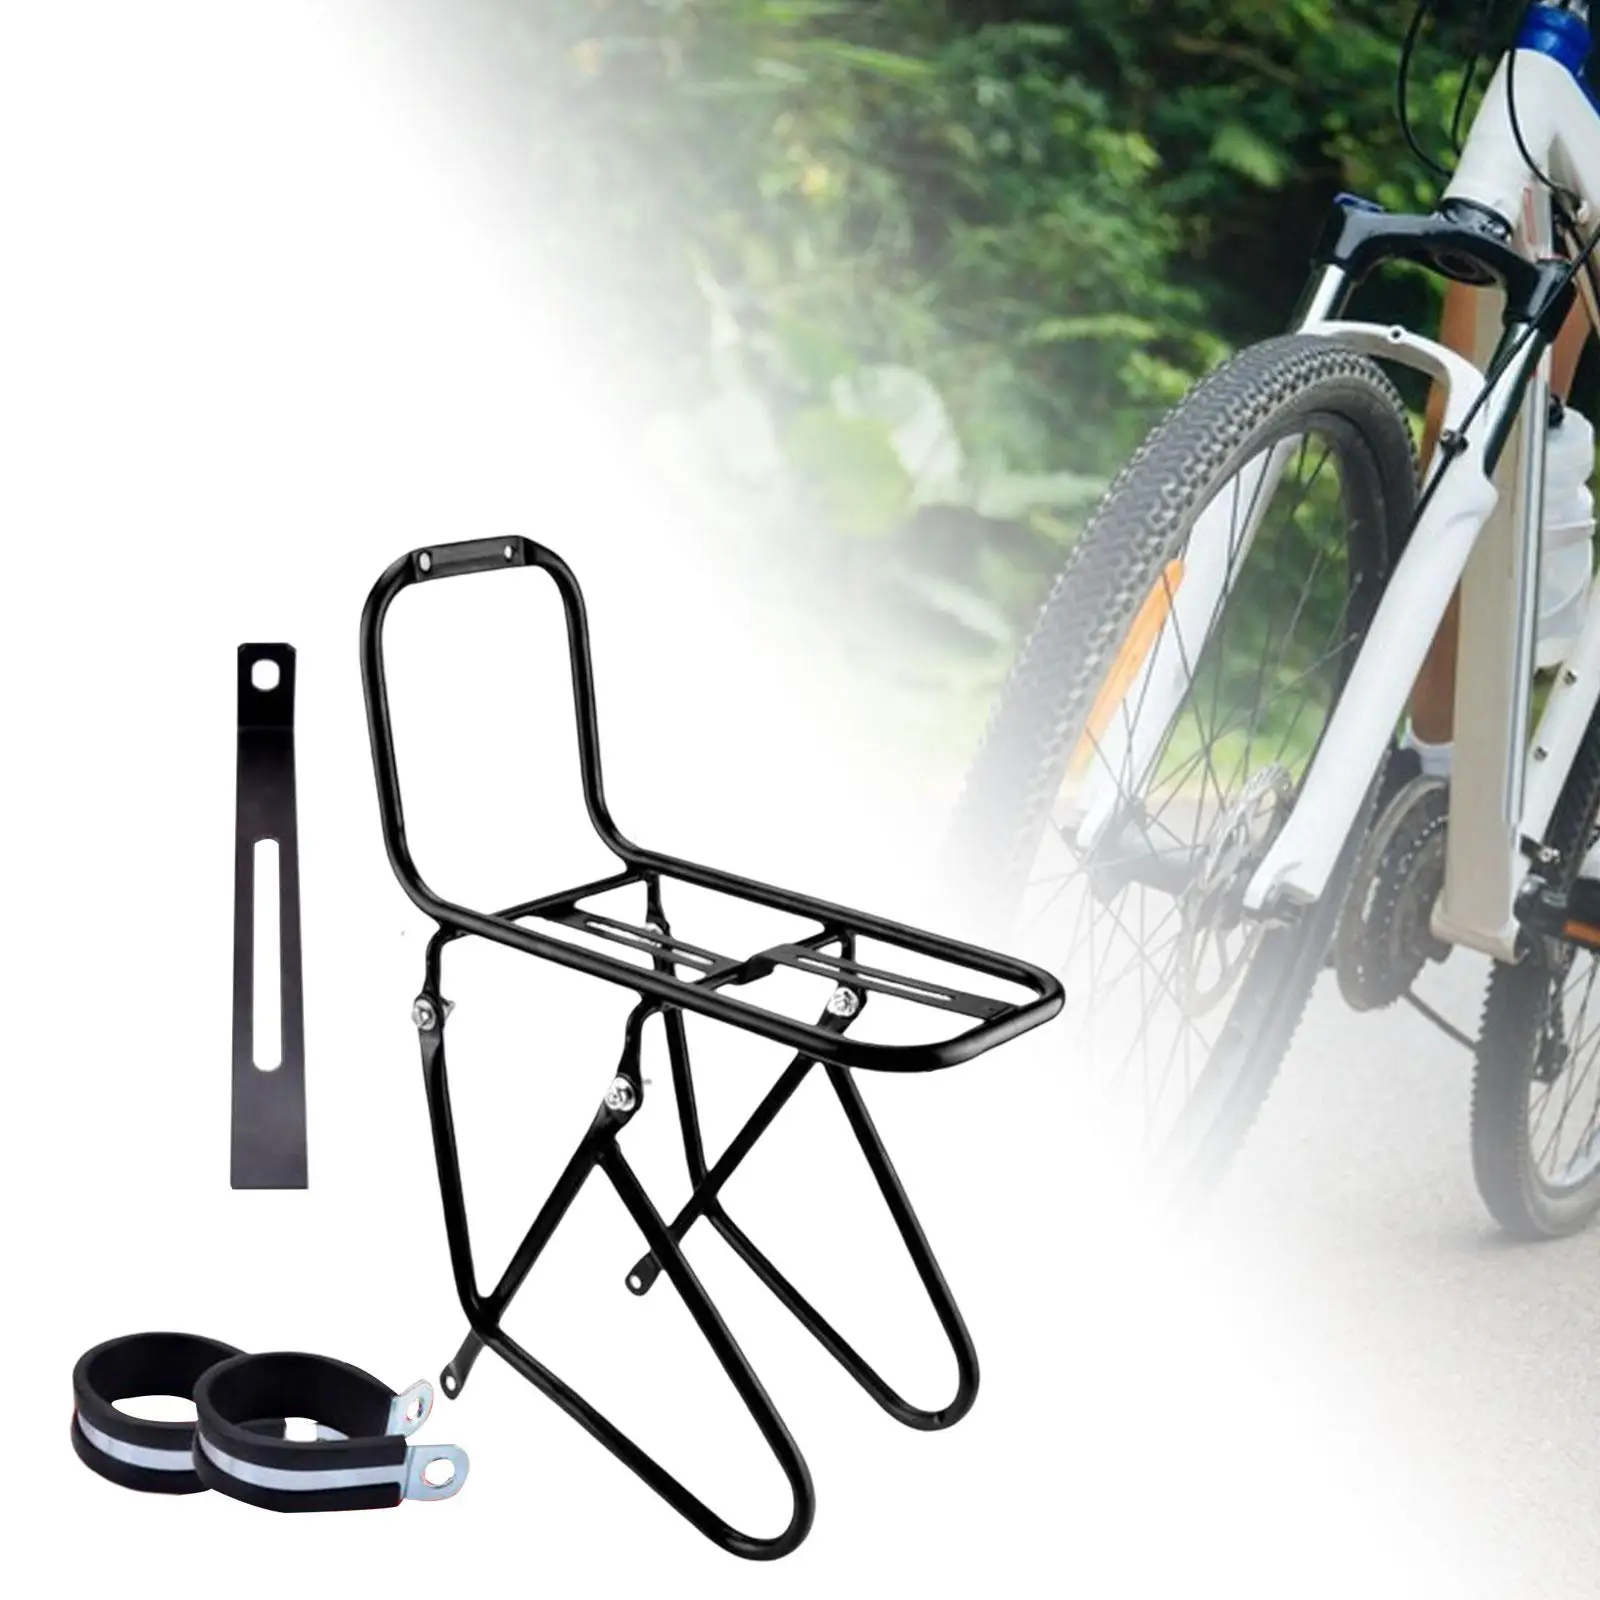 Cargo Pannier Equipment Bike Front Carrier Rack for Outdoor Long Distance Cycling